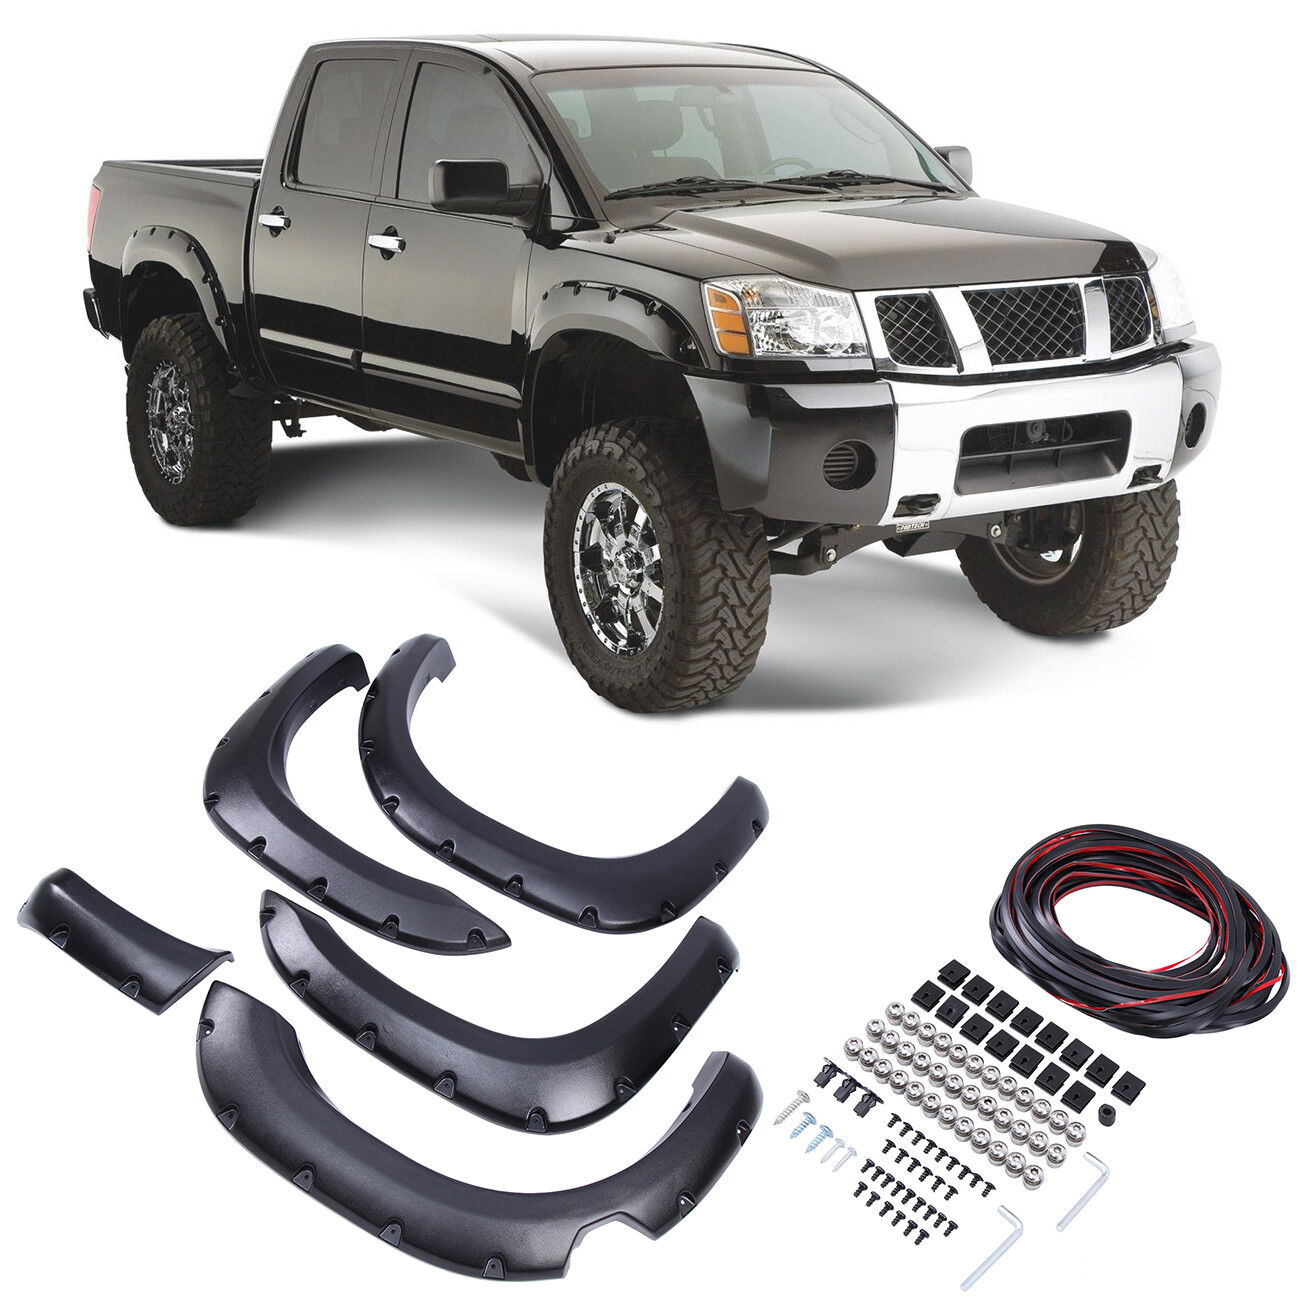 Pocket Front & Rear Fender Flares For 04-14 Nissan Titan with Lockbox Only